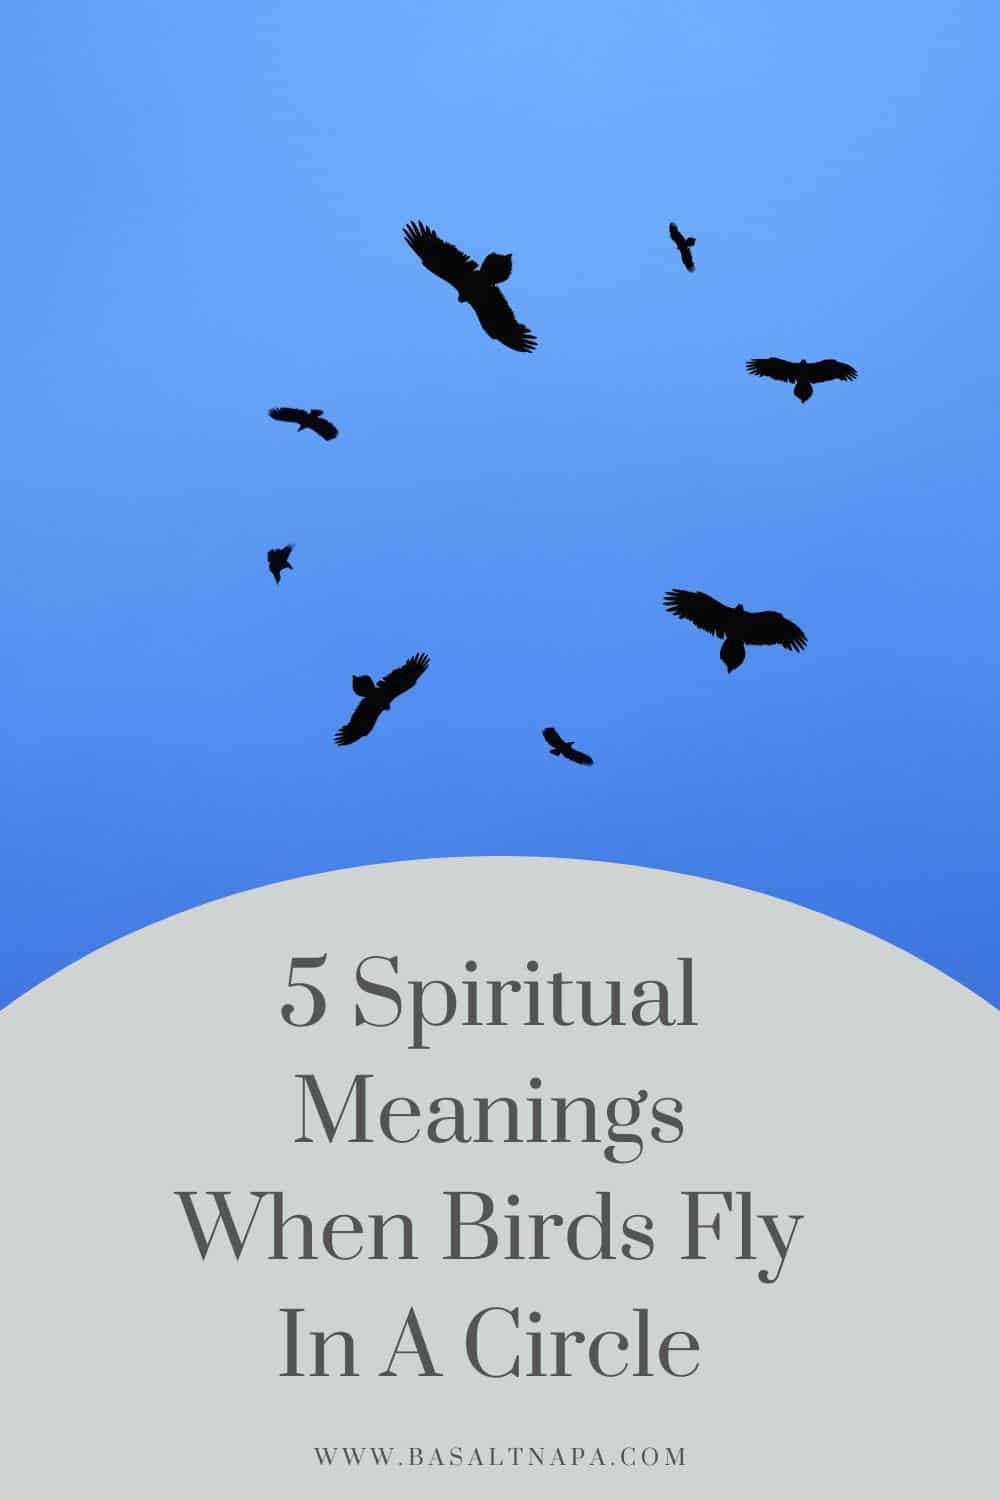 5 Spiritual Meanings When Birds Fly In A Circle